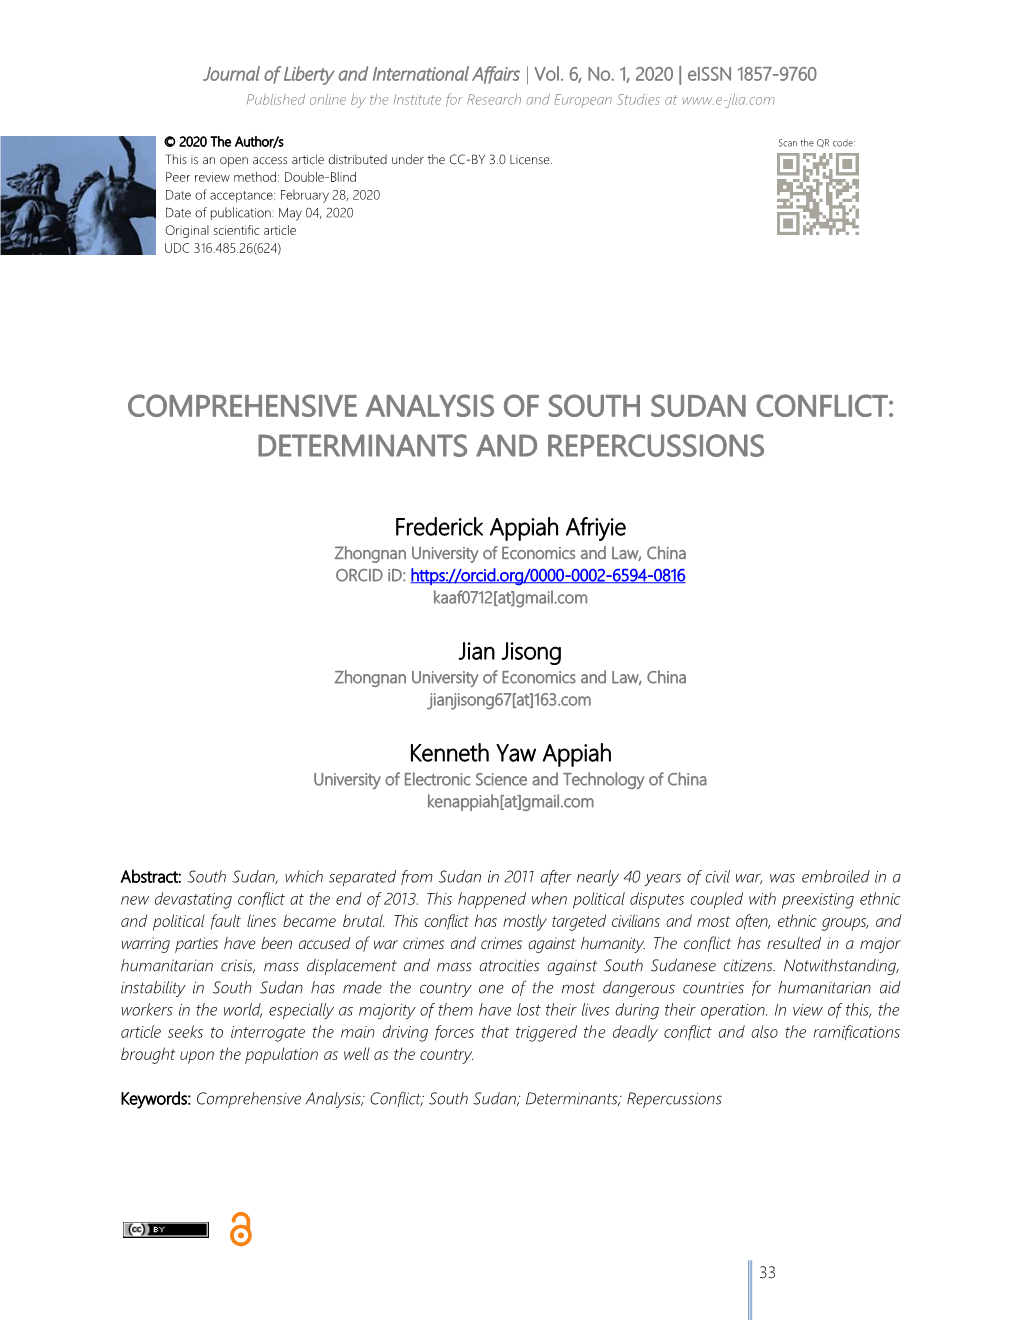 Comprehensive Analysis of South Sudan Conflict: Determinants and Repercussions